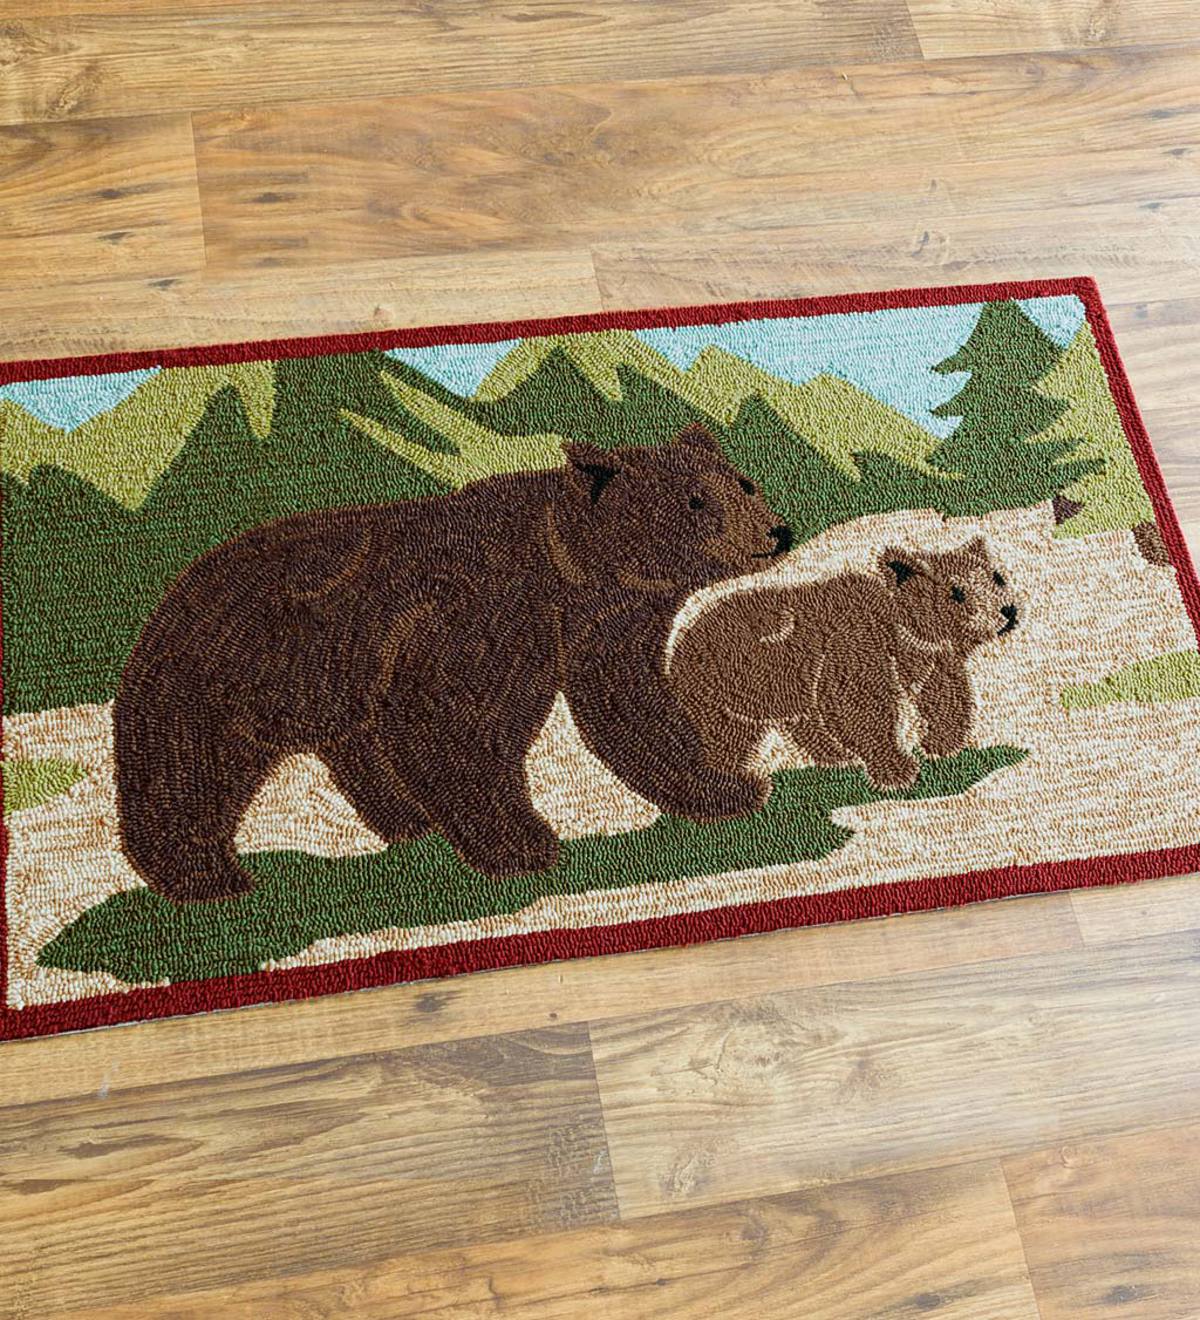 Indoor/Outdoor Rug with Brown Bear and Cub